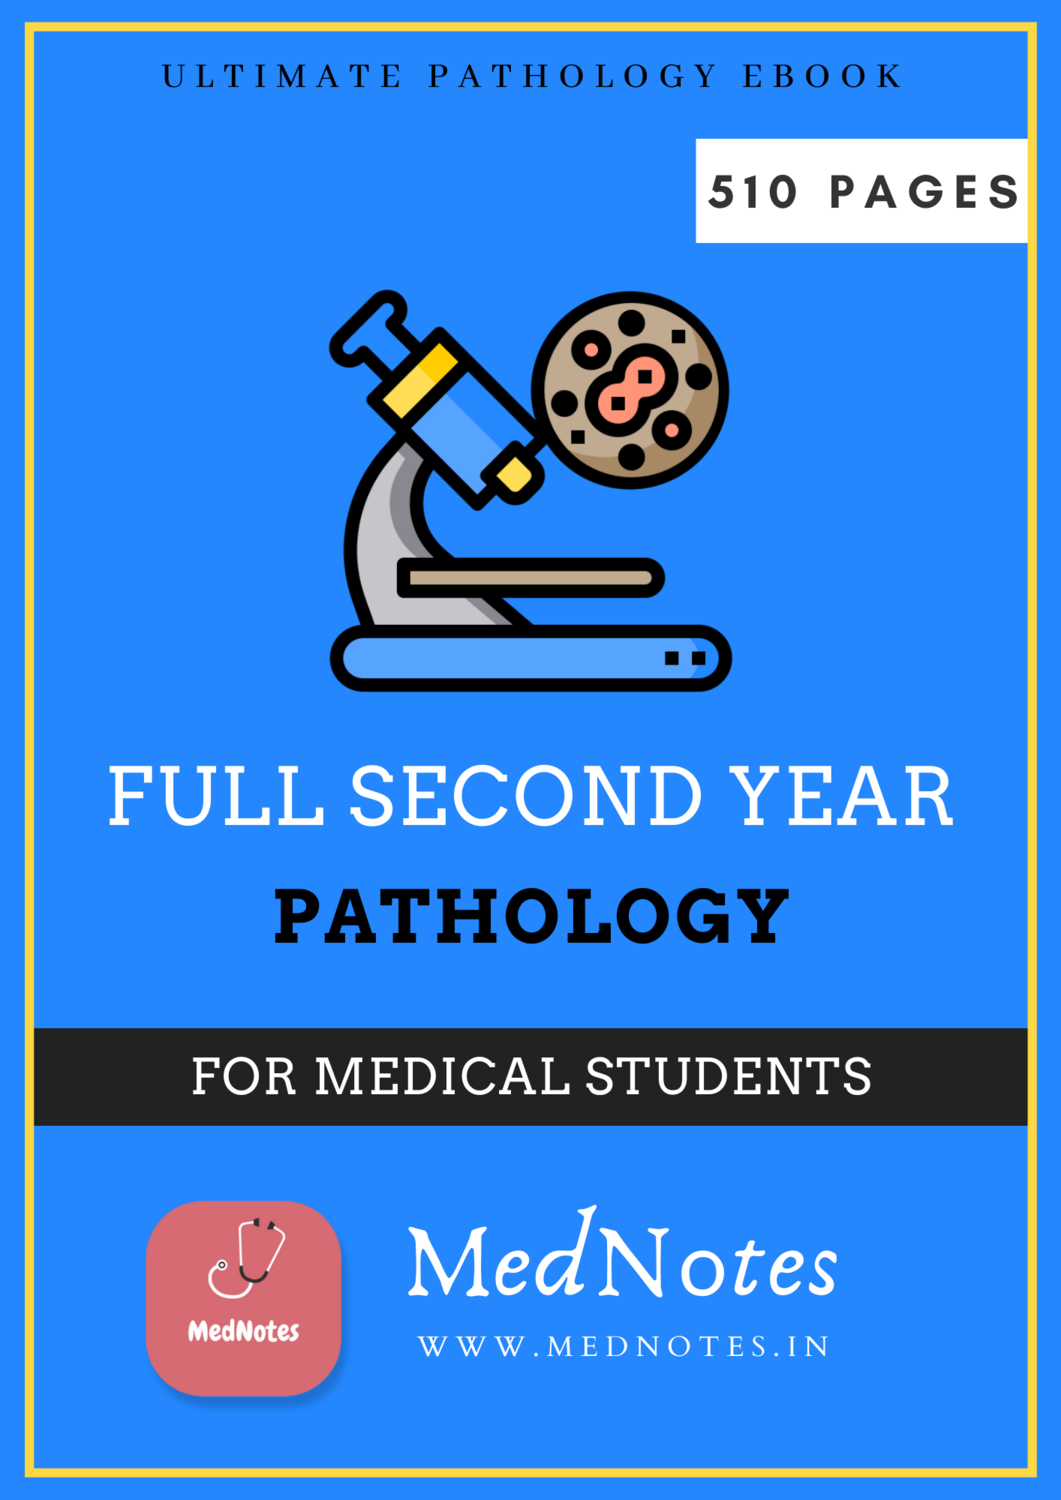 Full Second Year Pathology - MedNotes Ebook